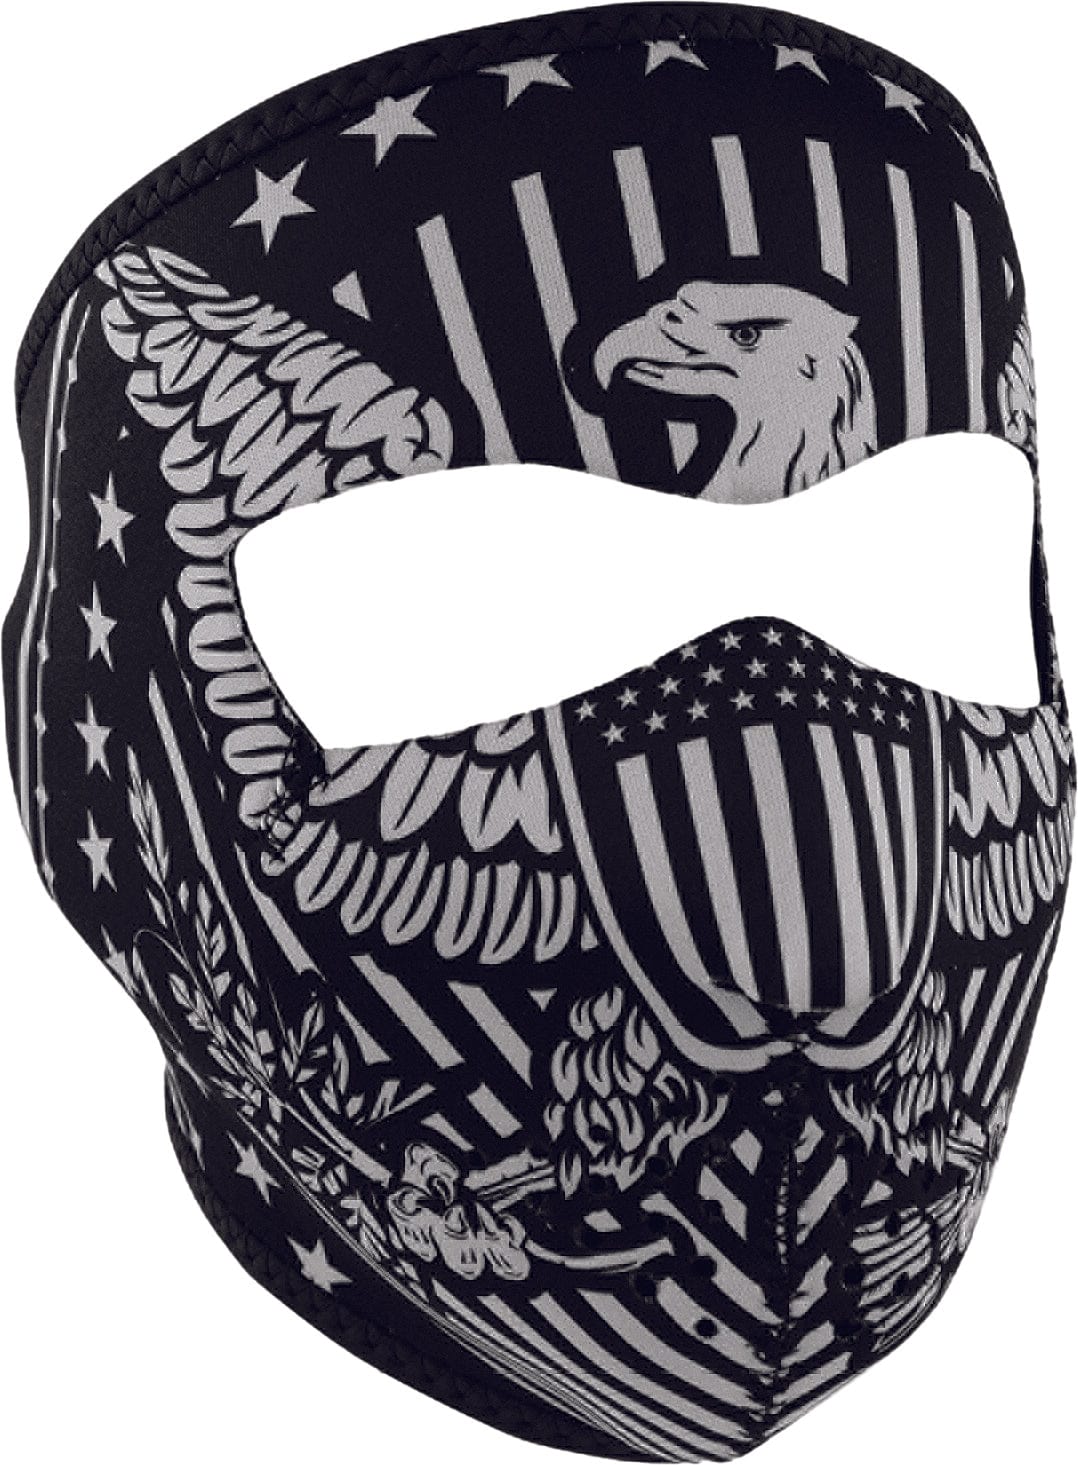 Western Powersports Facemask Vintage Eagle Full Face Mask by Zan WNFM412